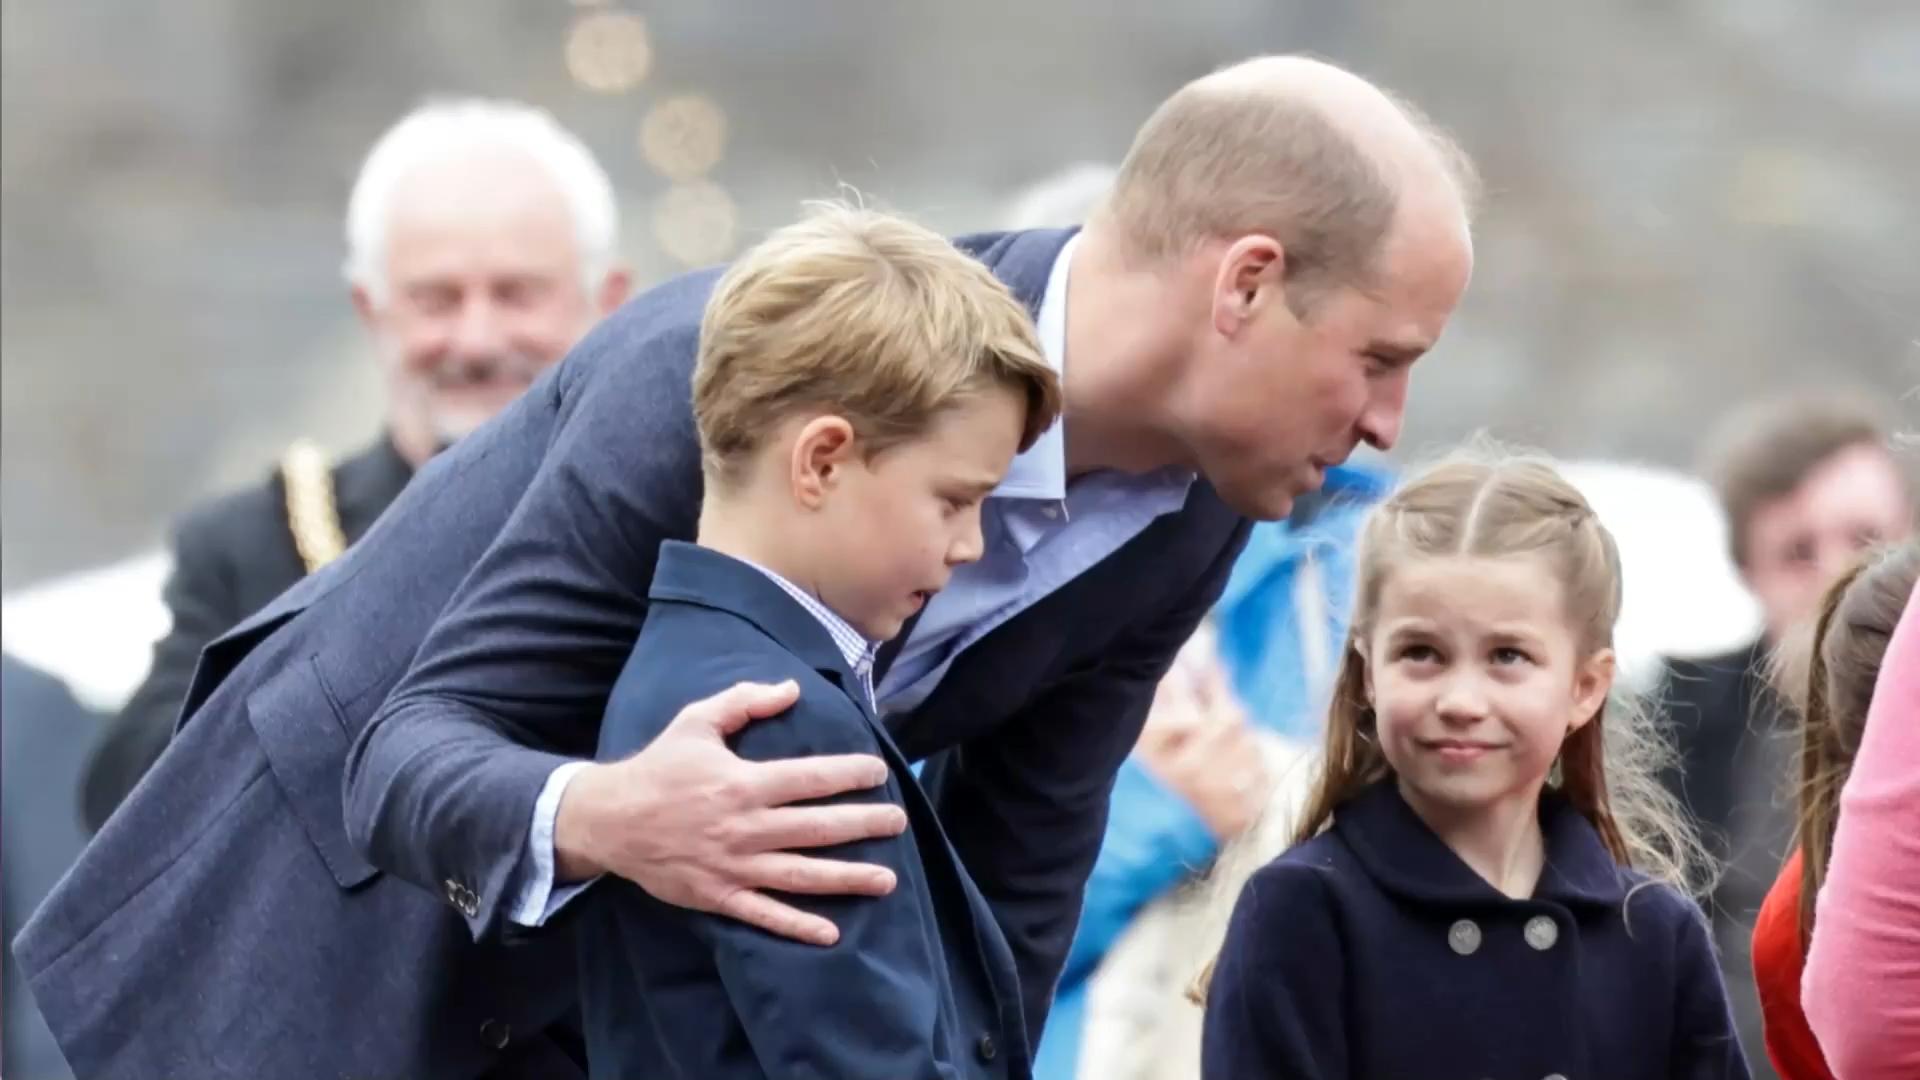 Sweet daddy-daughter moment with Princess Charlotte Prince William